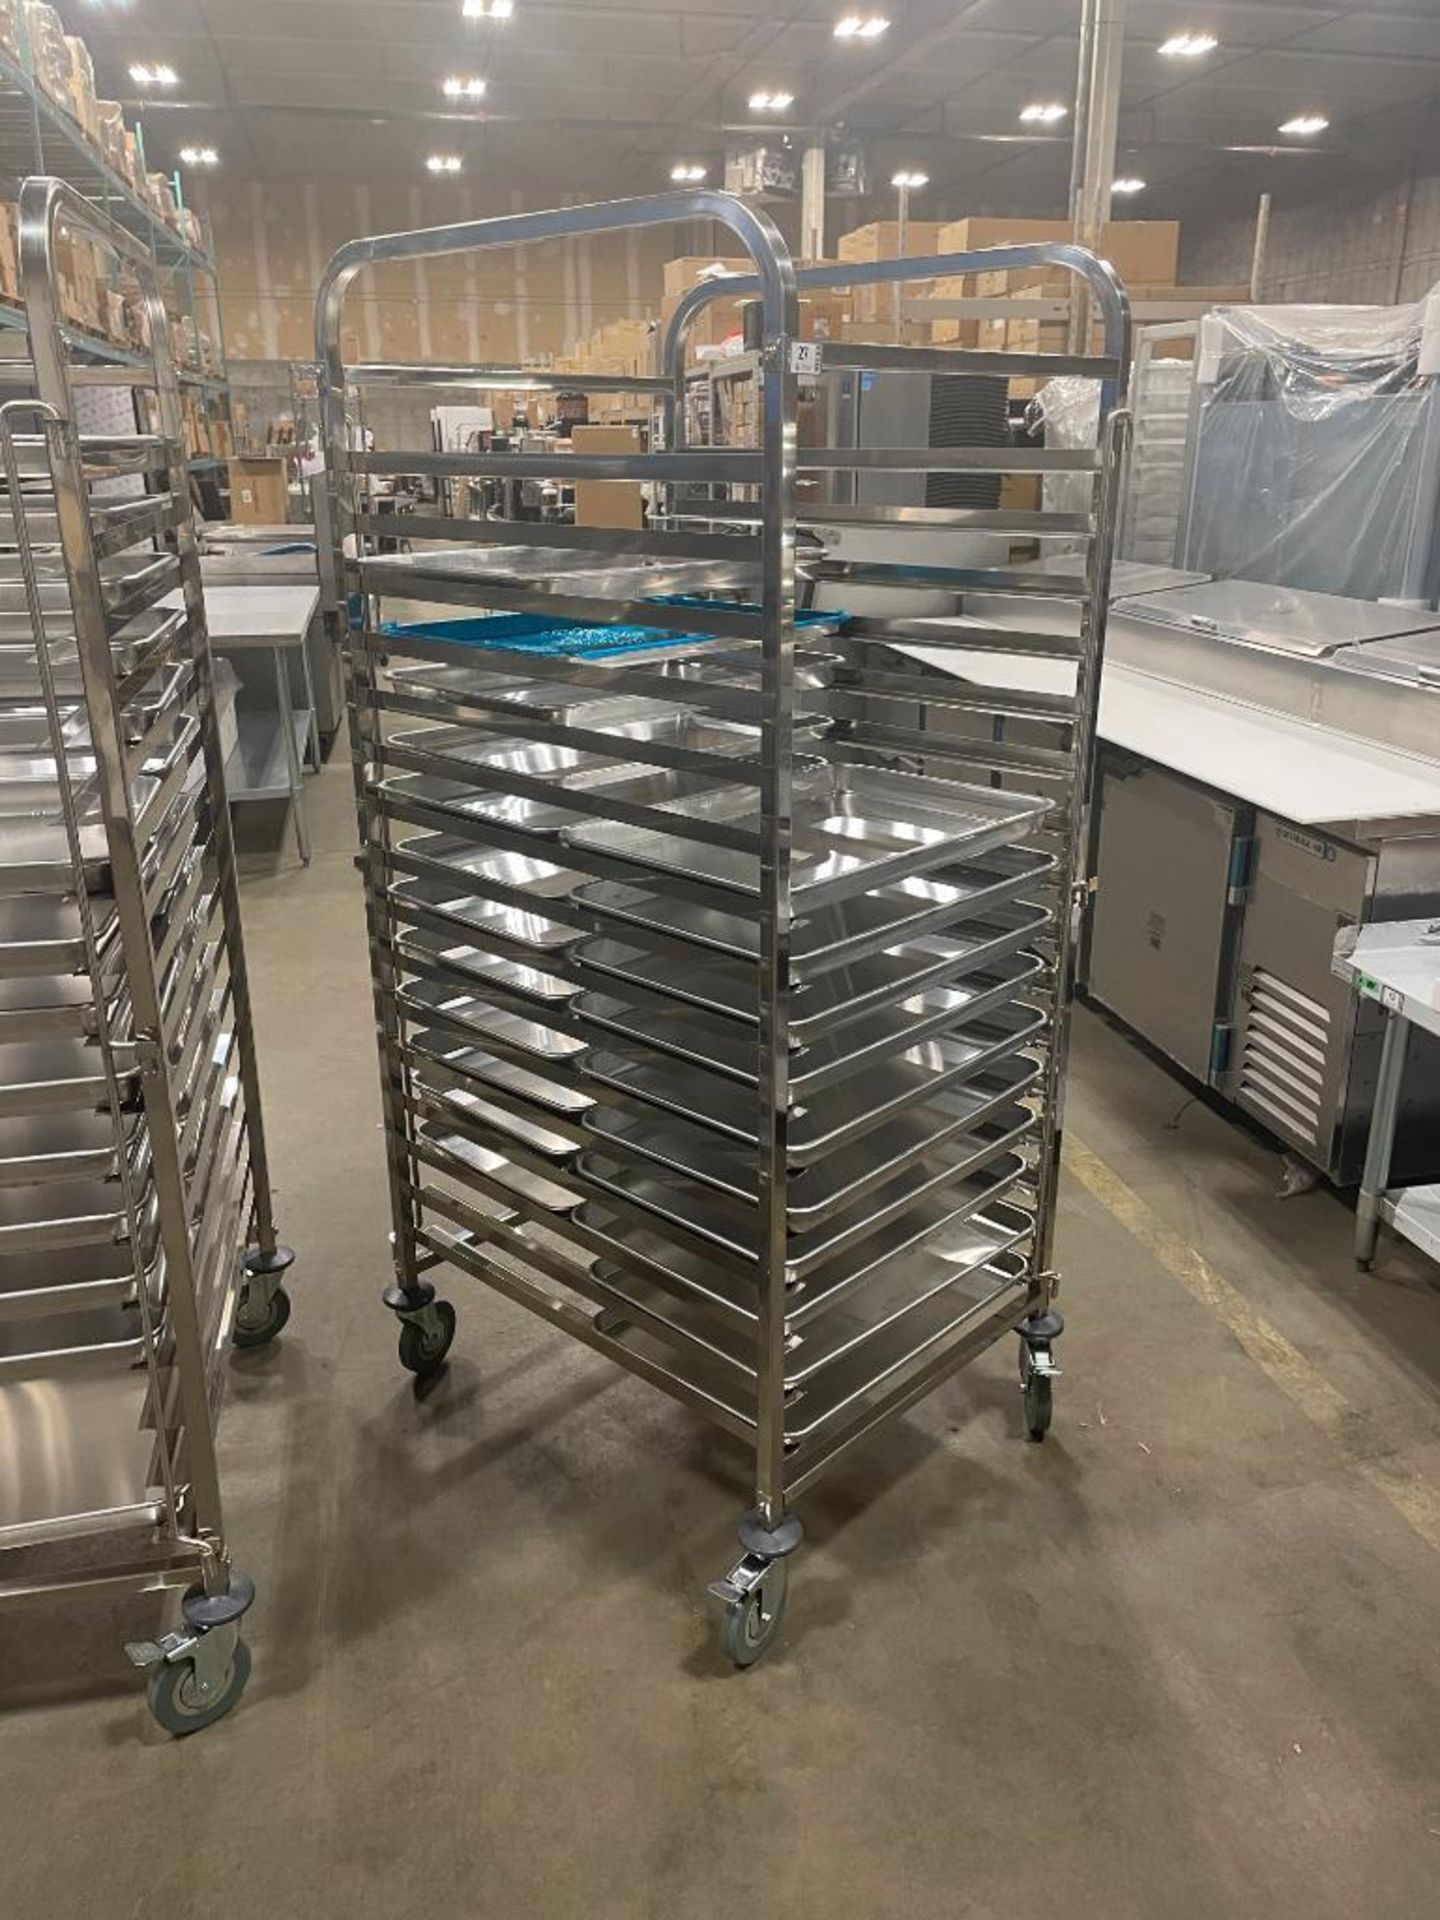 NEW STAINLESS STEEL 16-SLOT OVERSIZED BUN PAN RACK WITH PAN GUARD & (22) PANS - Image 3 of 8